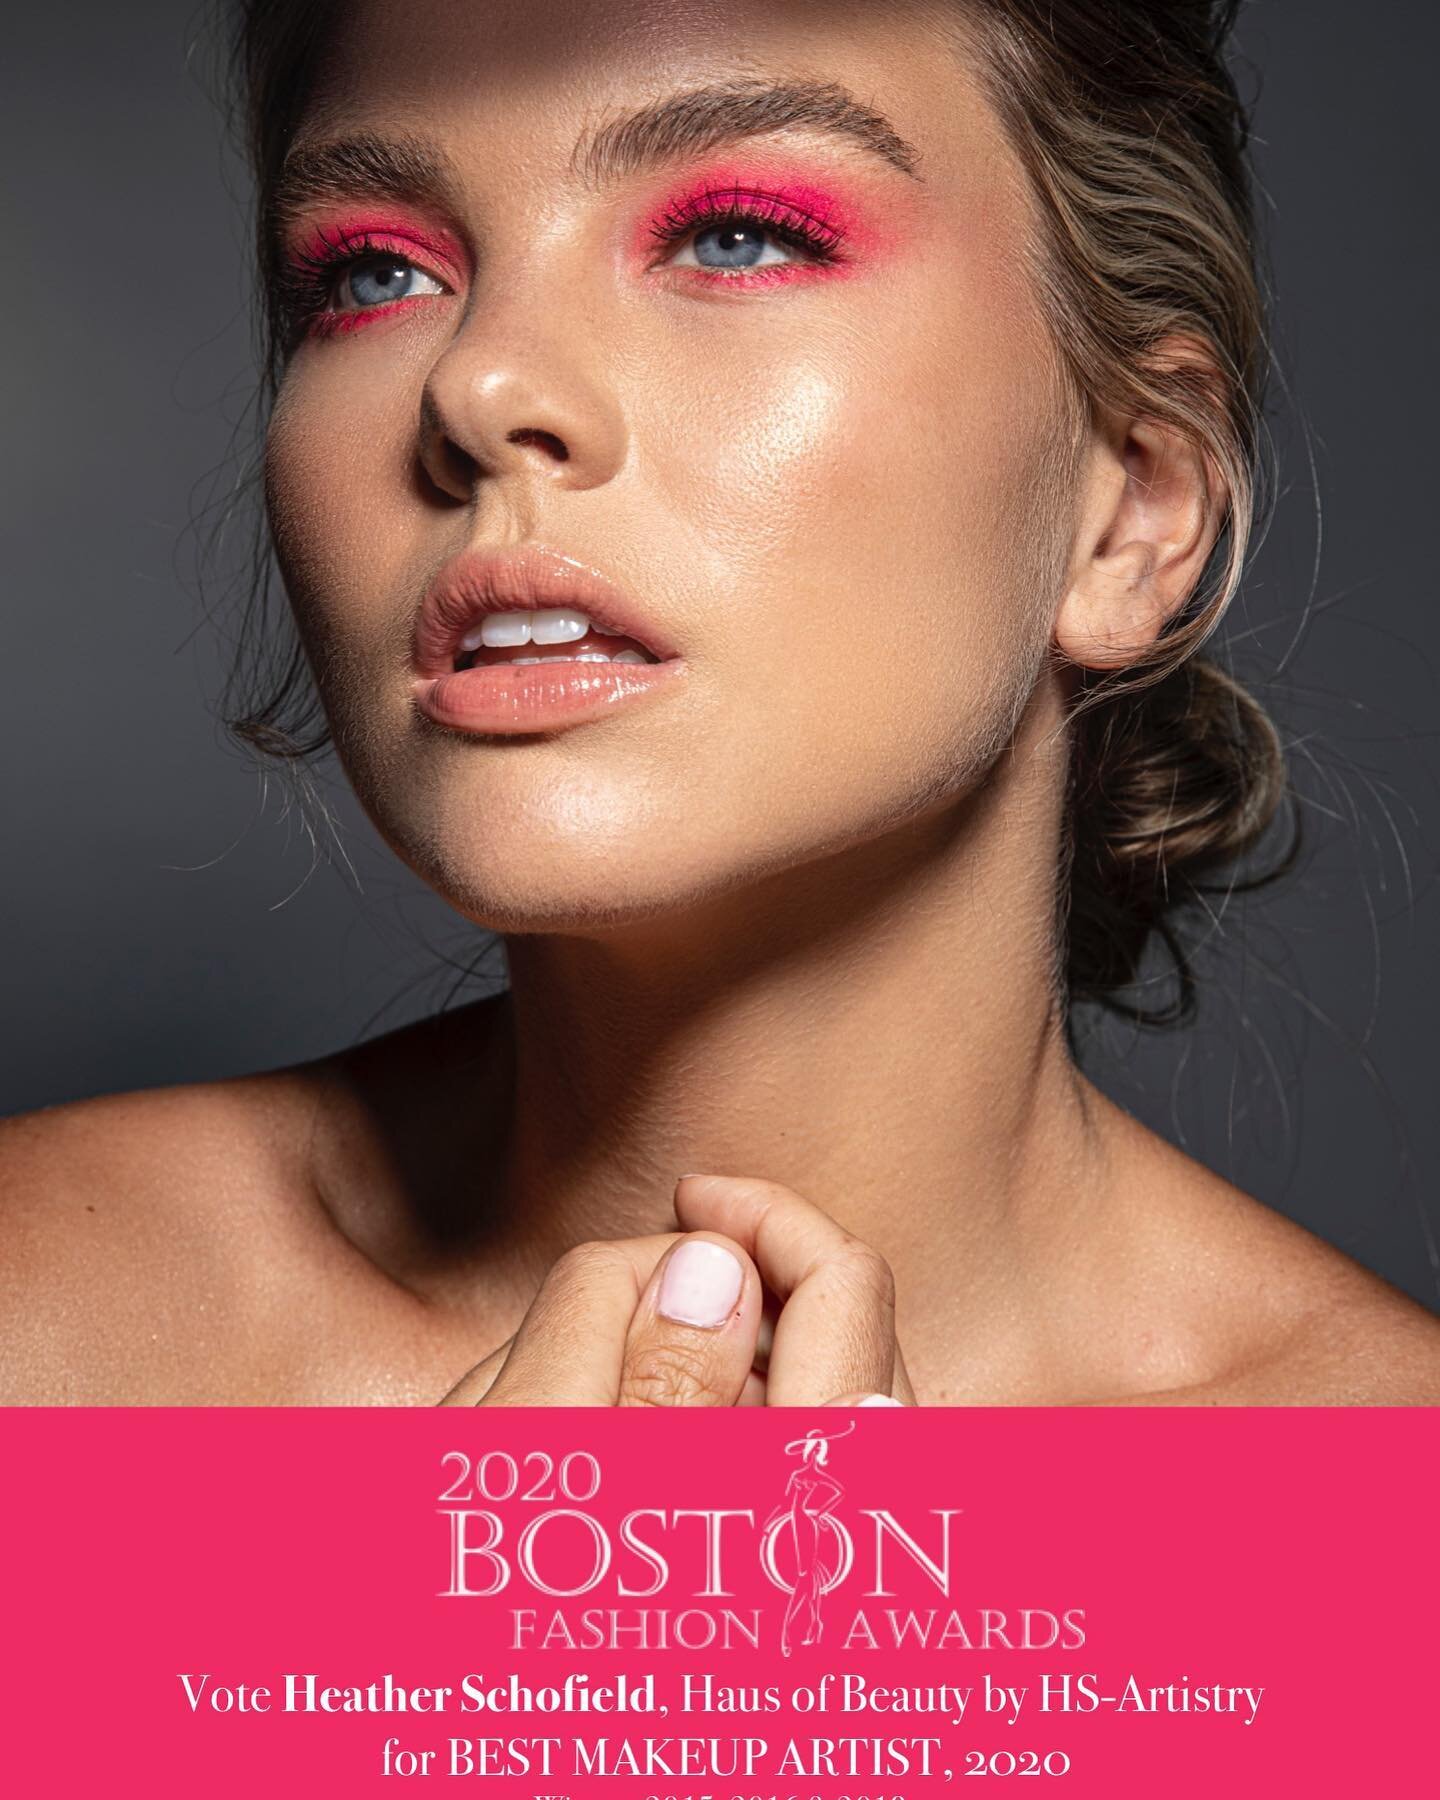 🍾It&rsquo;s an honor to have been nominated again for Boston Fashion Award&rsquo;s Makeup Artist of the Year, 2020! 🎉This year has been so hard for everyone.  I&rsquo;m beyond proud to have been nominated amongst such strong artists! 💗
.
.
.
🗳You